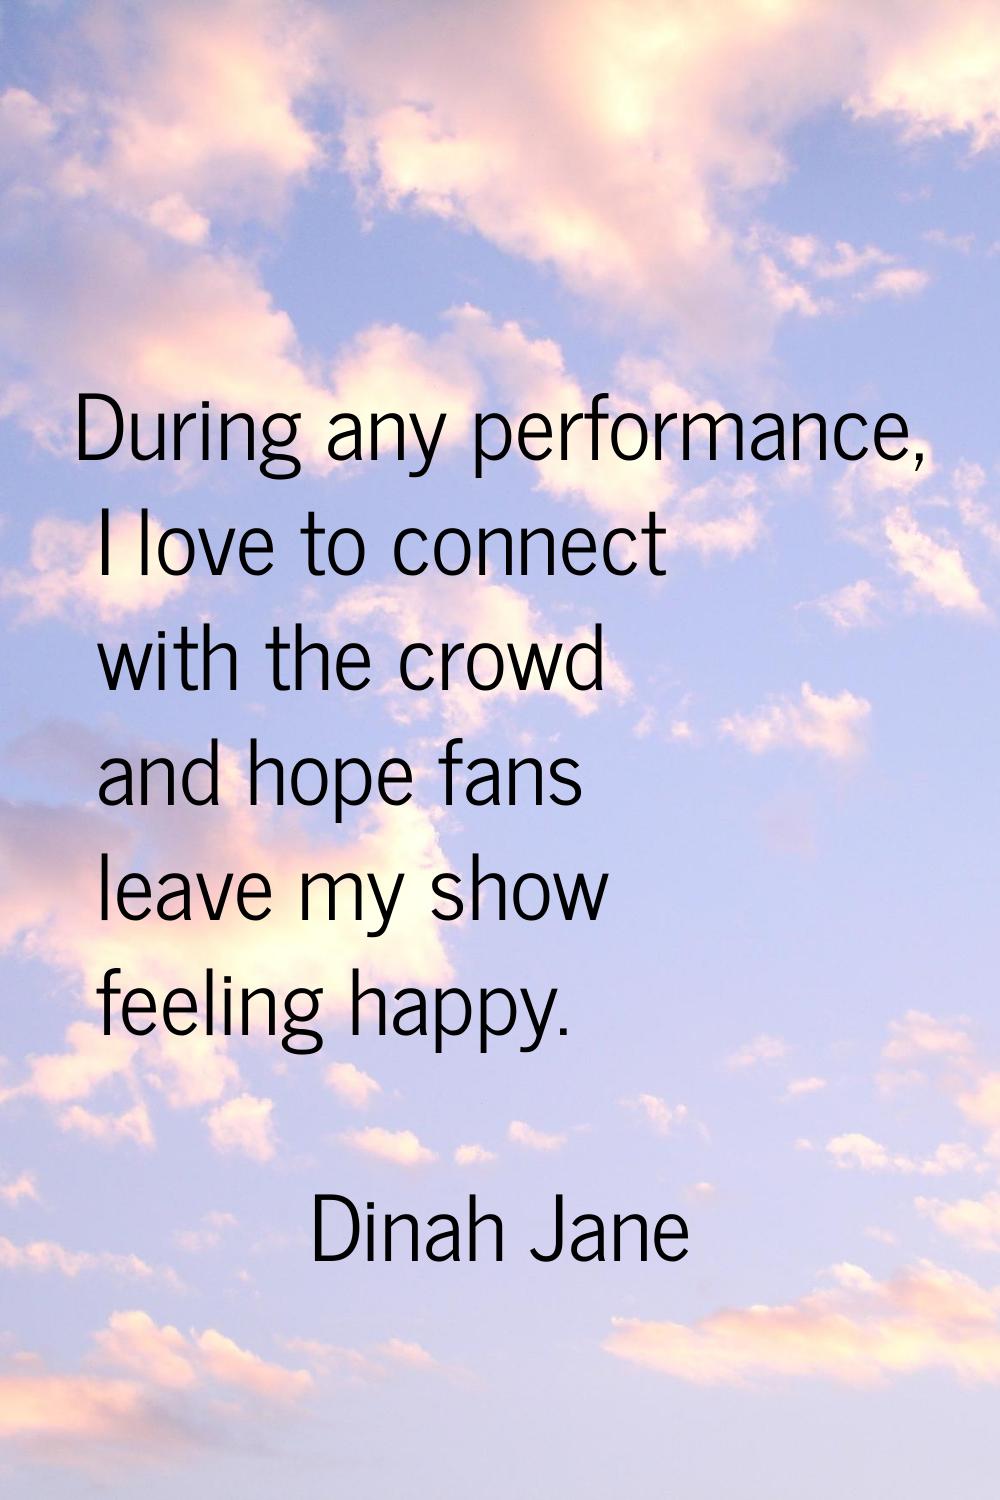 During any performance, I love to connect with the crowd and hope fans leave my show feeling happy.